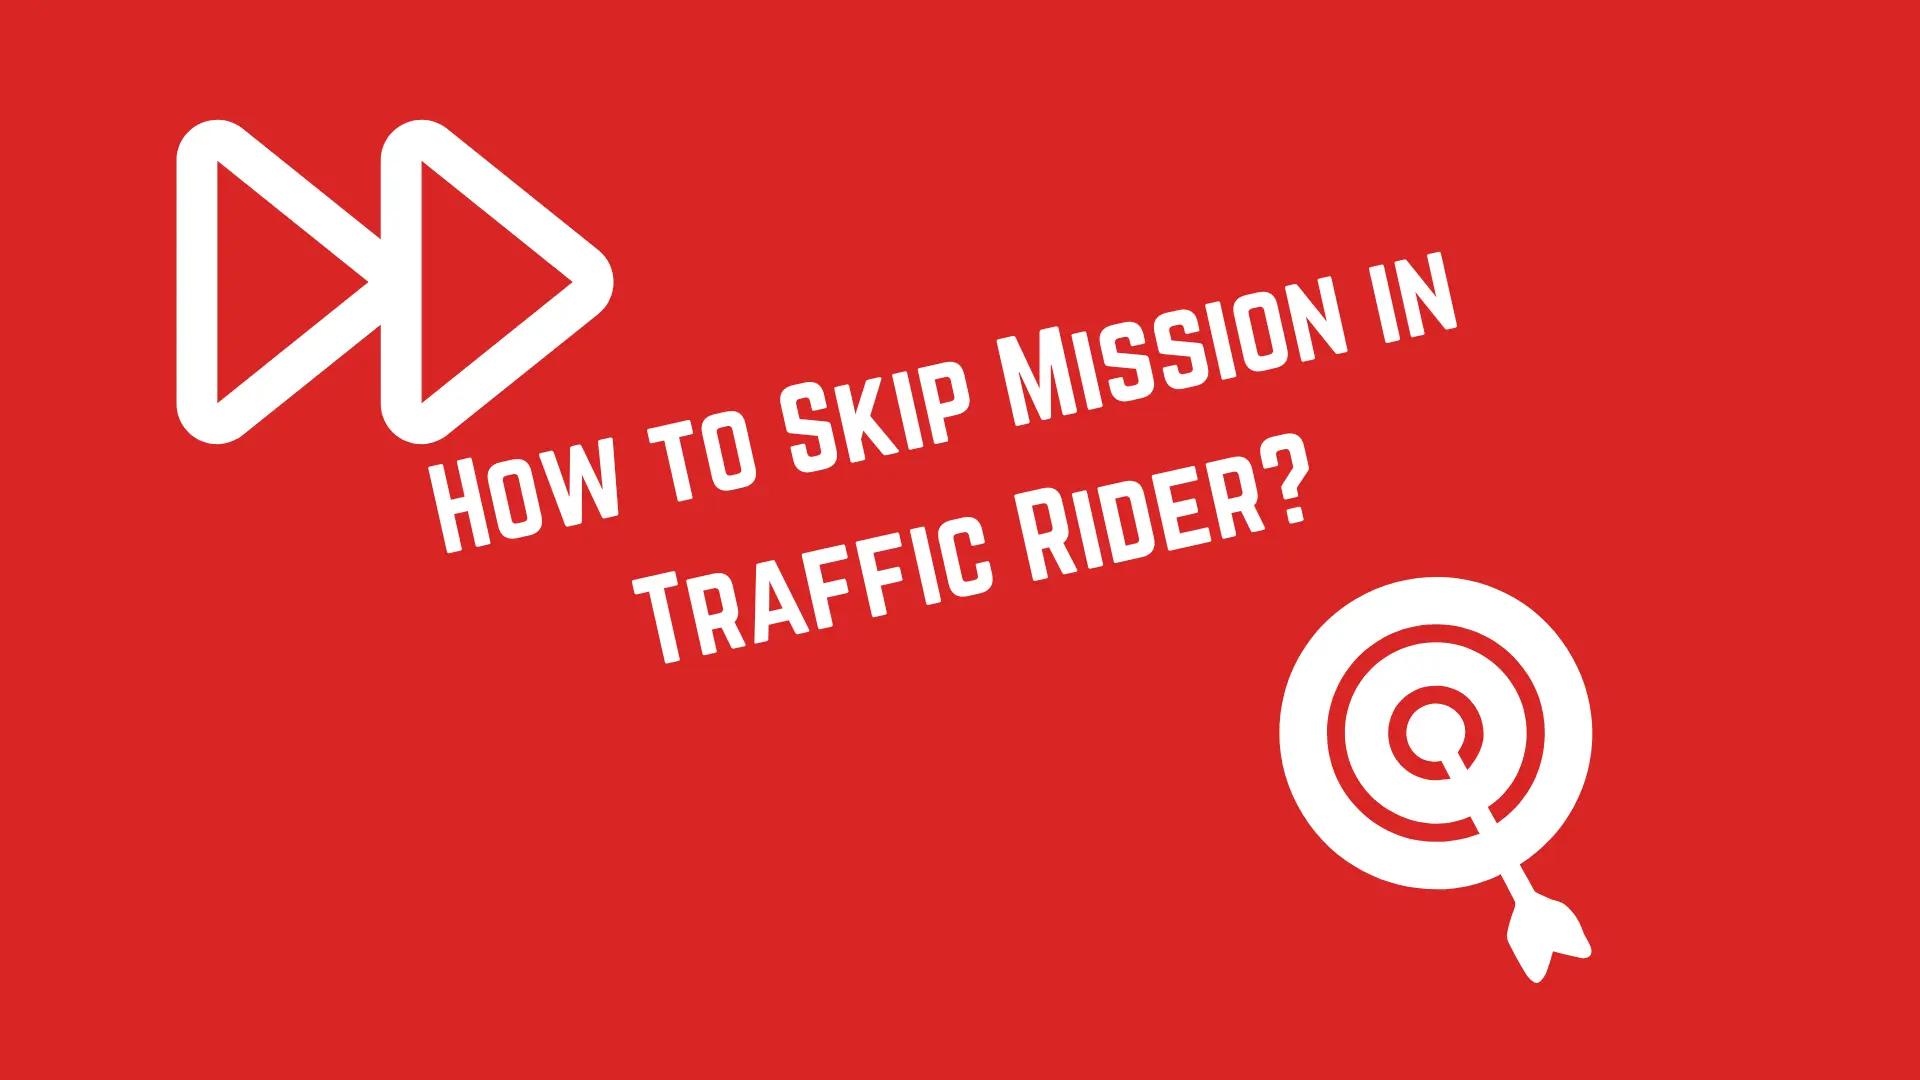 How to Skip Mission in Traffic Rider? Rc20Earning